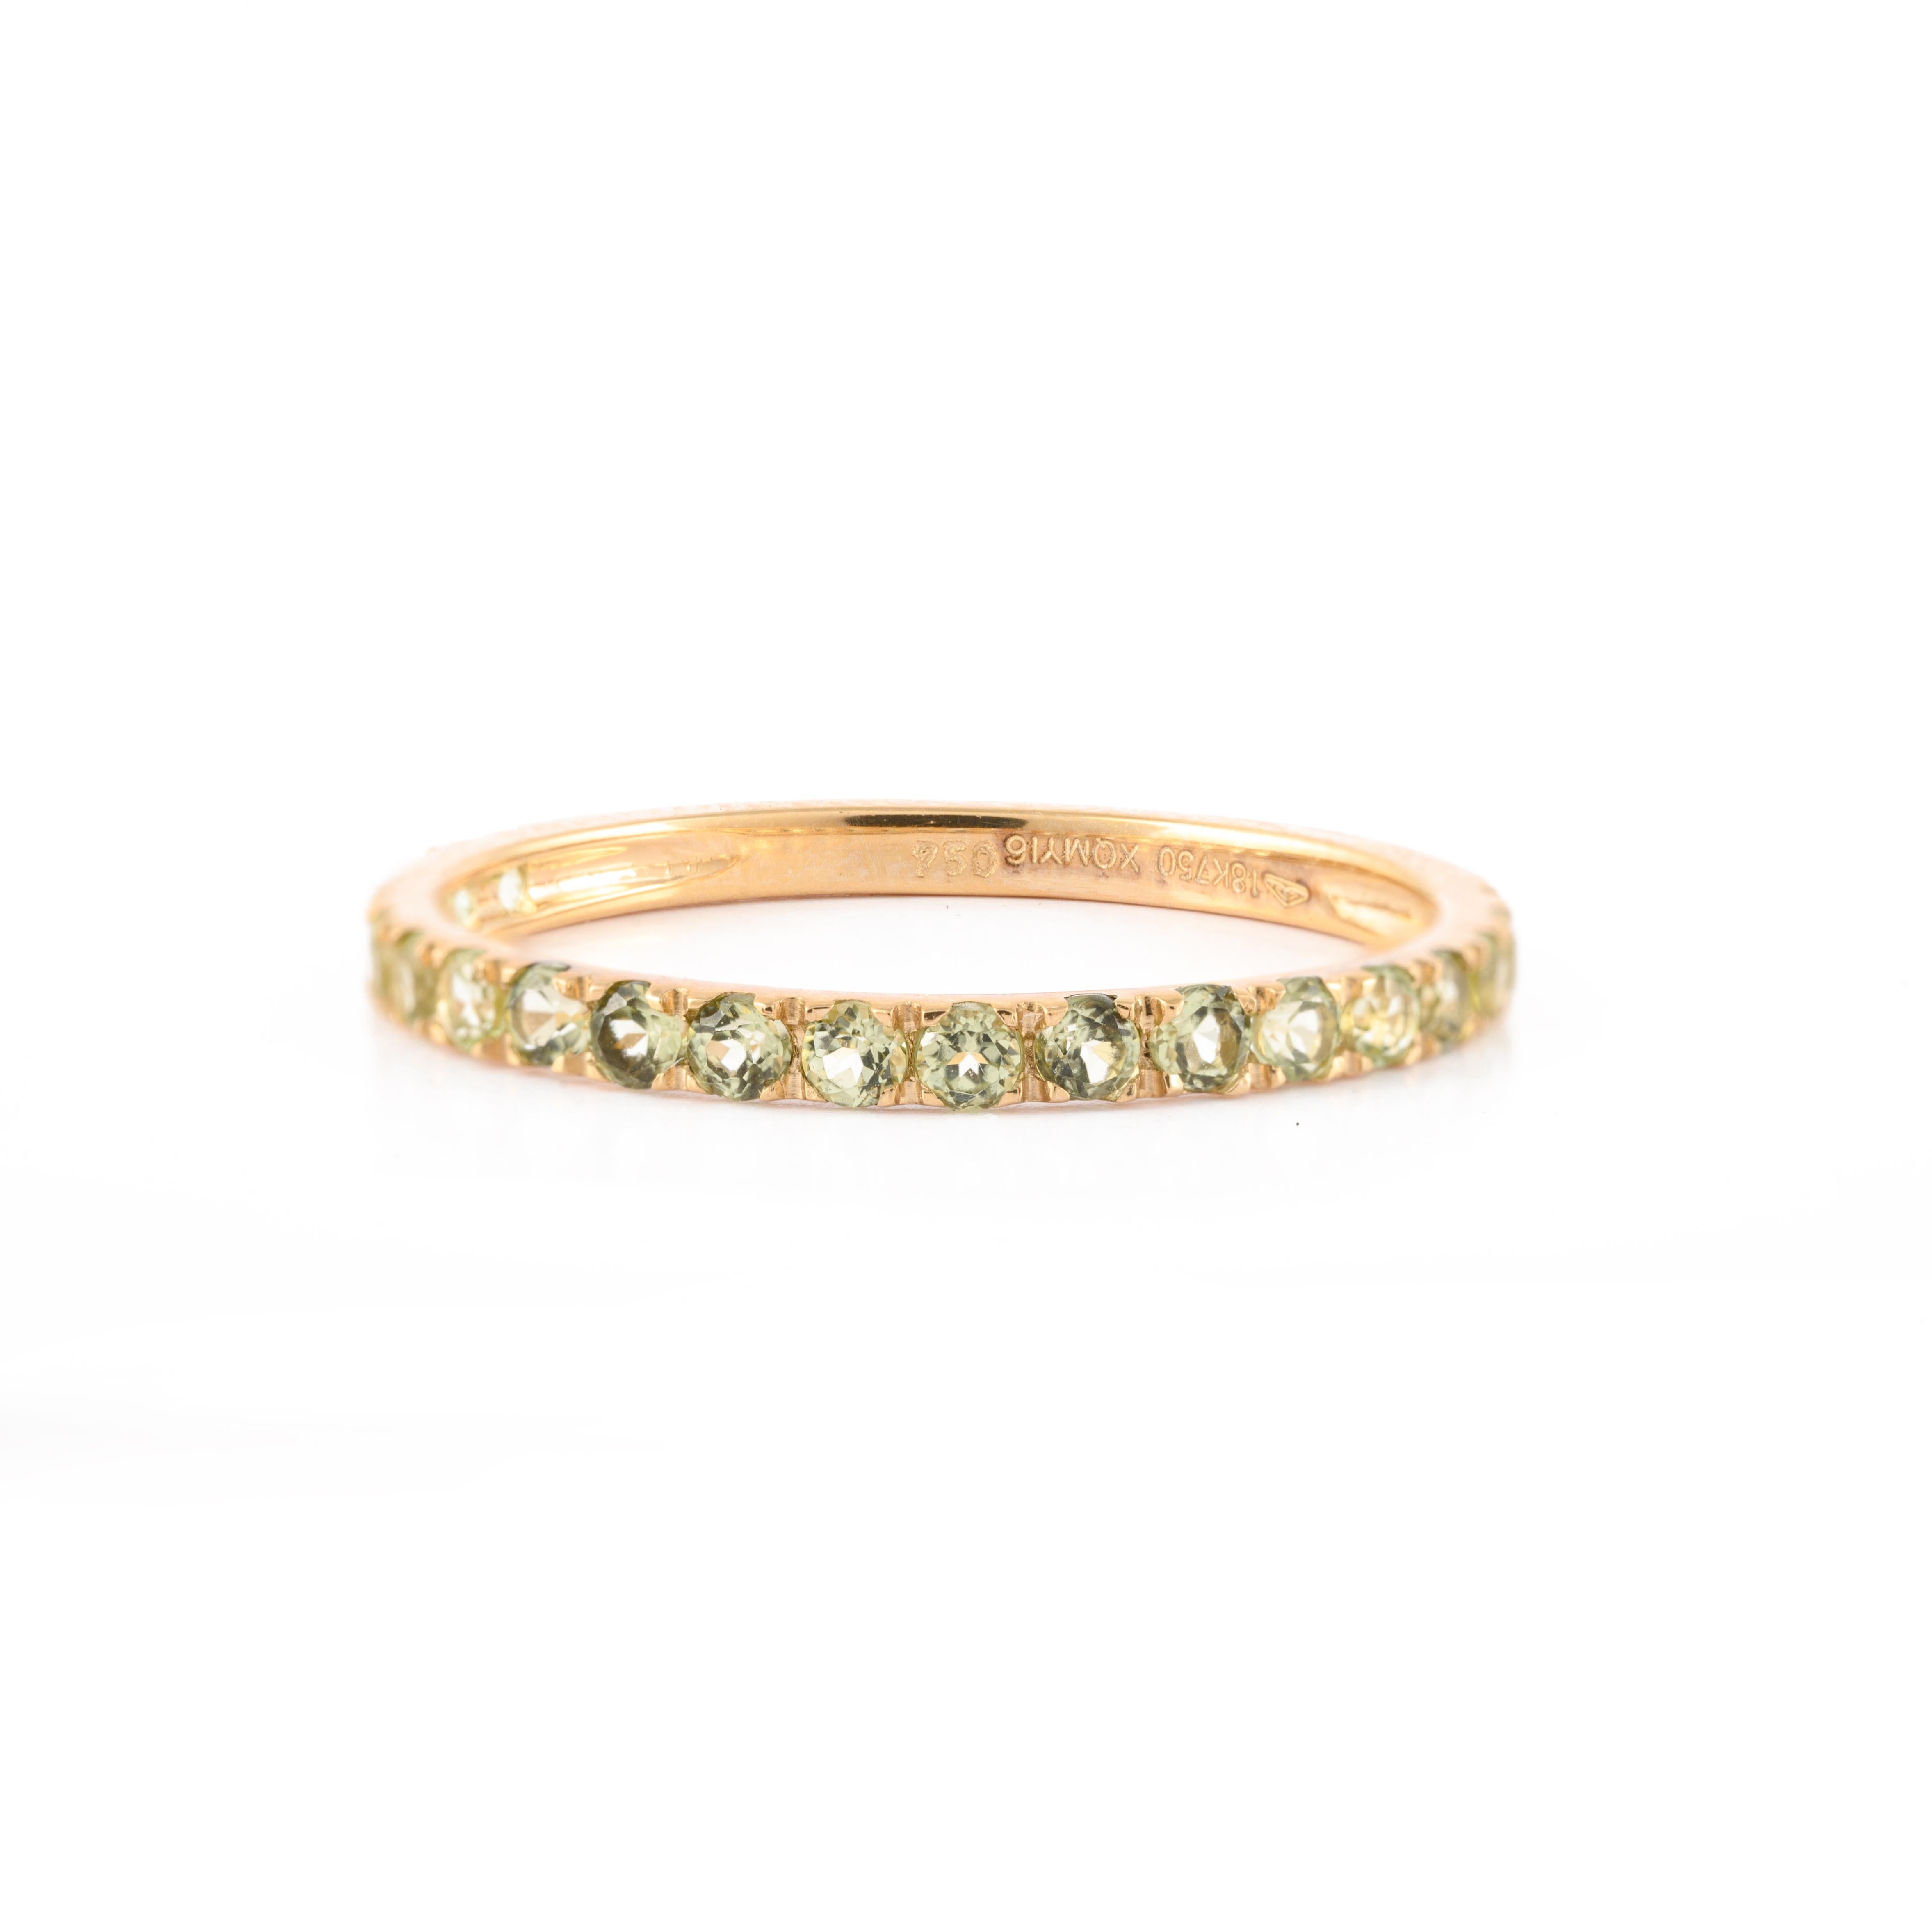 For Sale:  Peridot Pave Eternity Band, Stackable Peridot Band Ring 14k Solid Yellow Gold 2